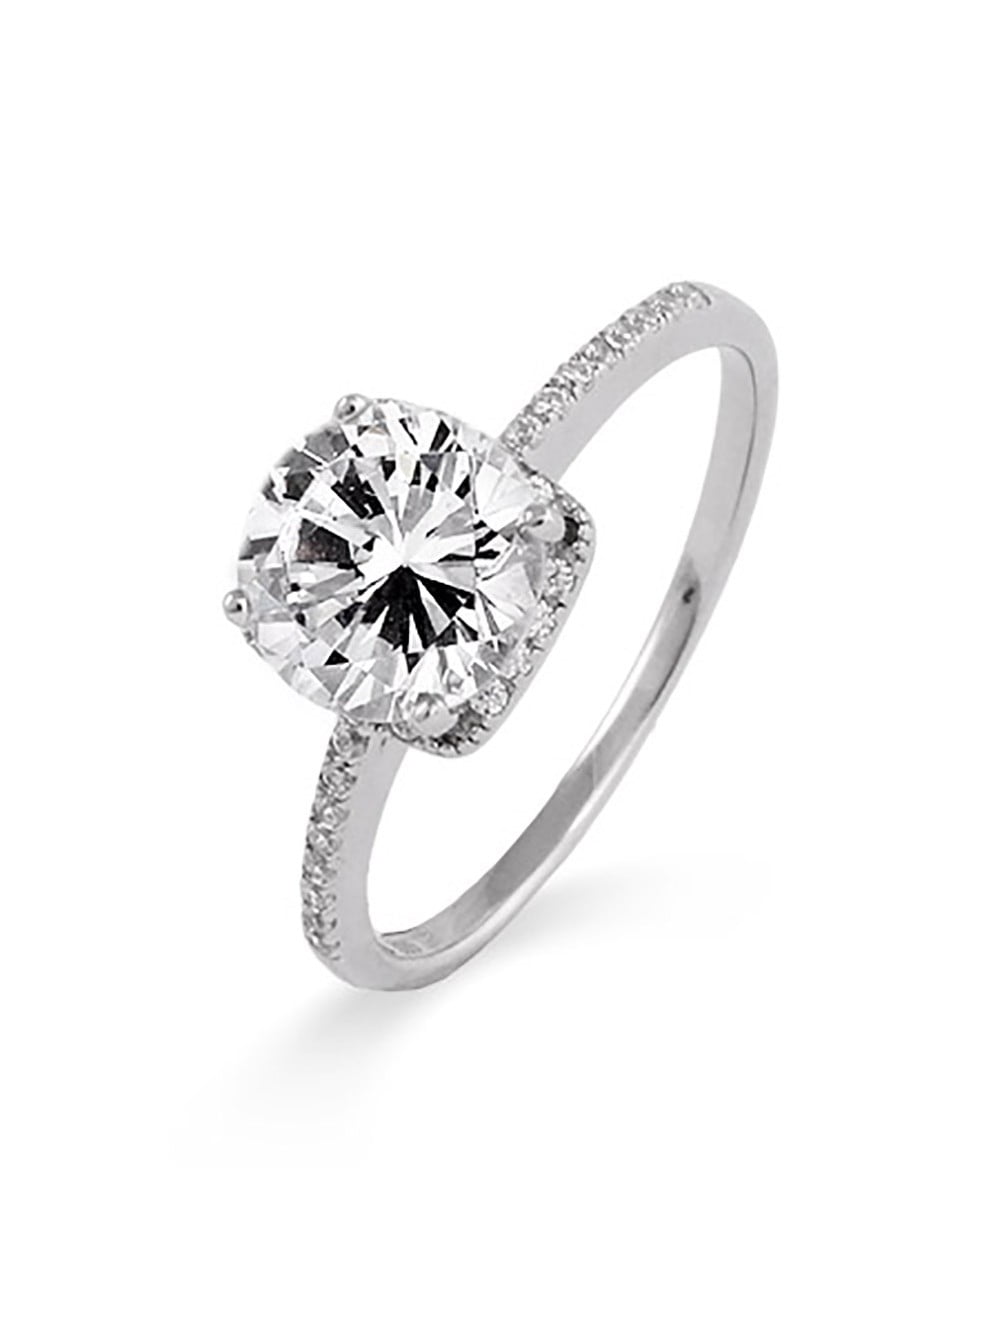 3.85 Carat D-Color Fancy Shape Solitaire Engagement Ring In 925 Sterling Silver 